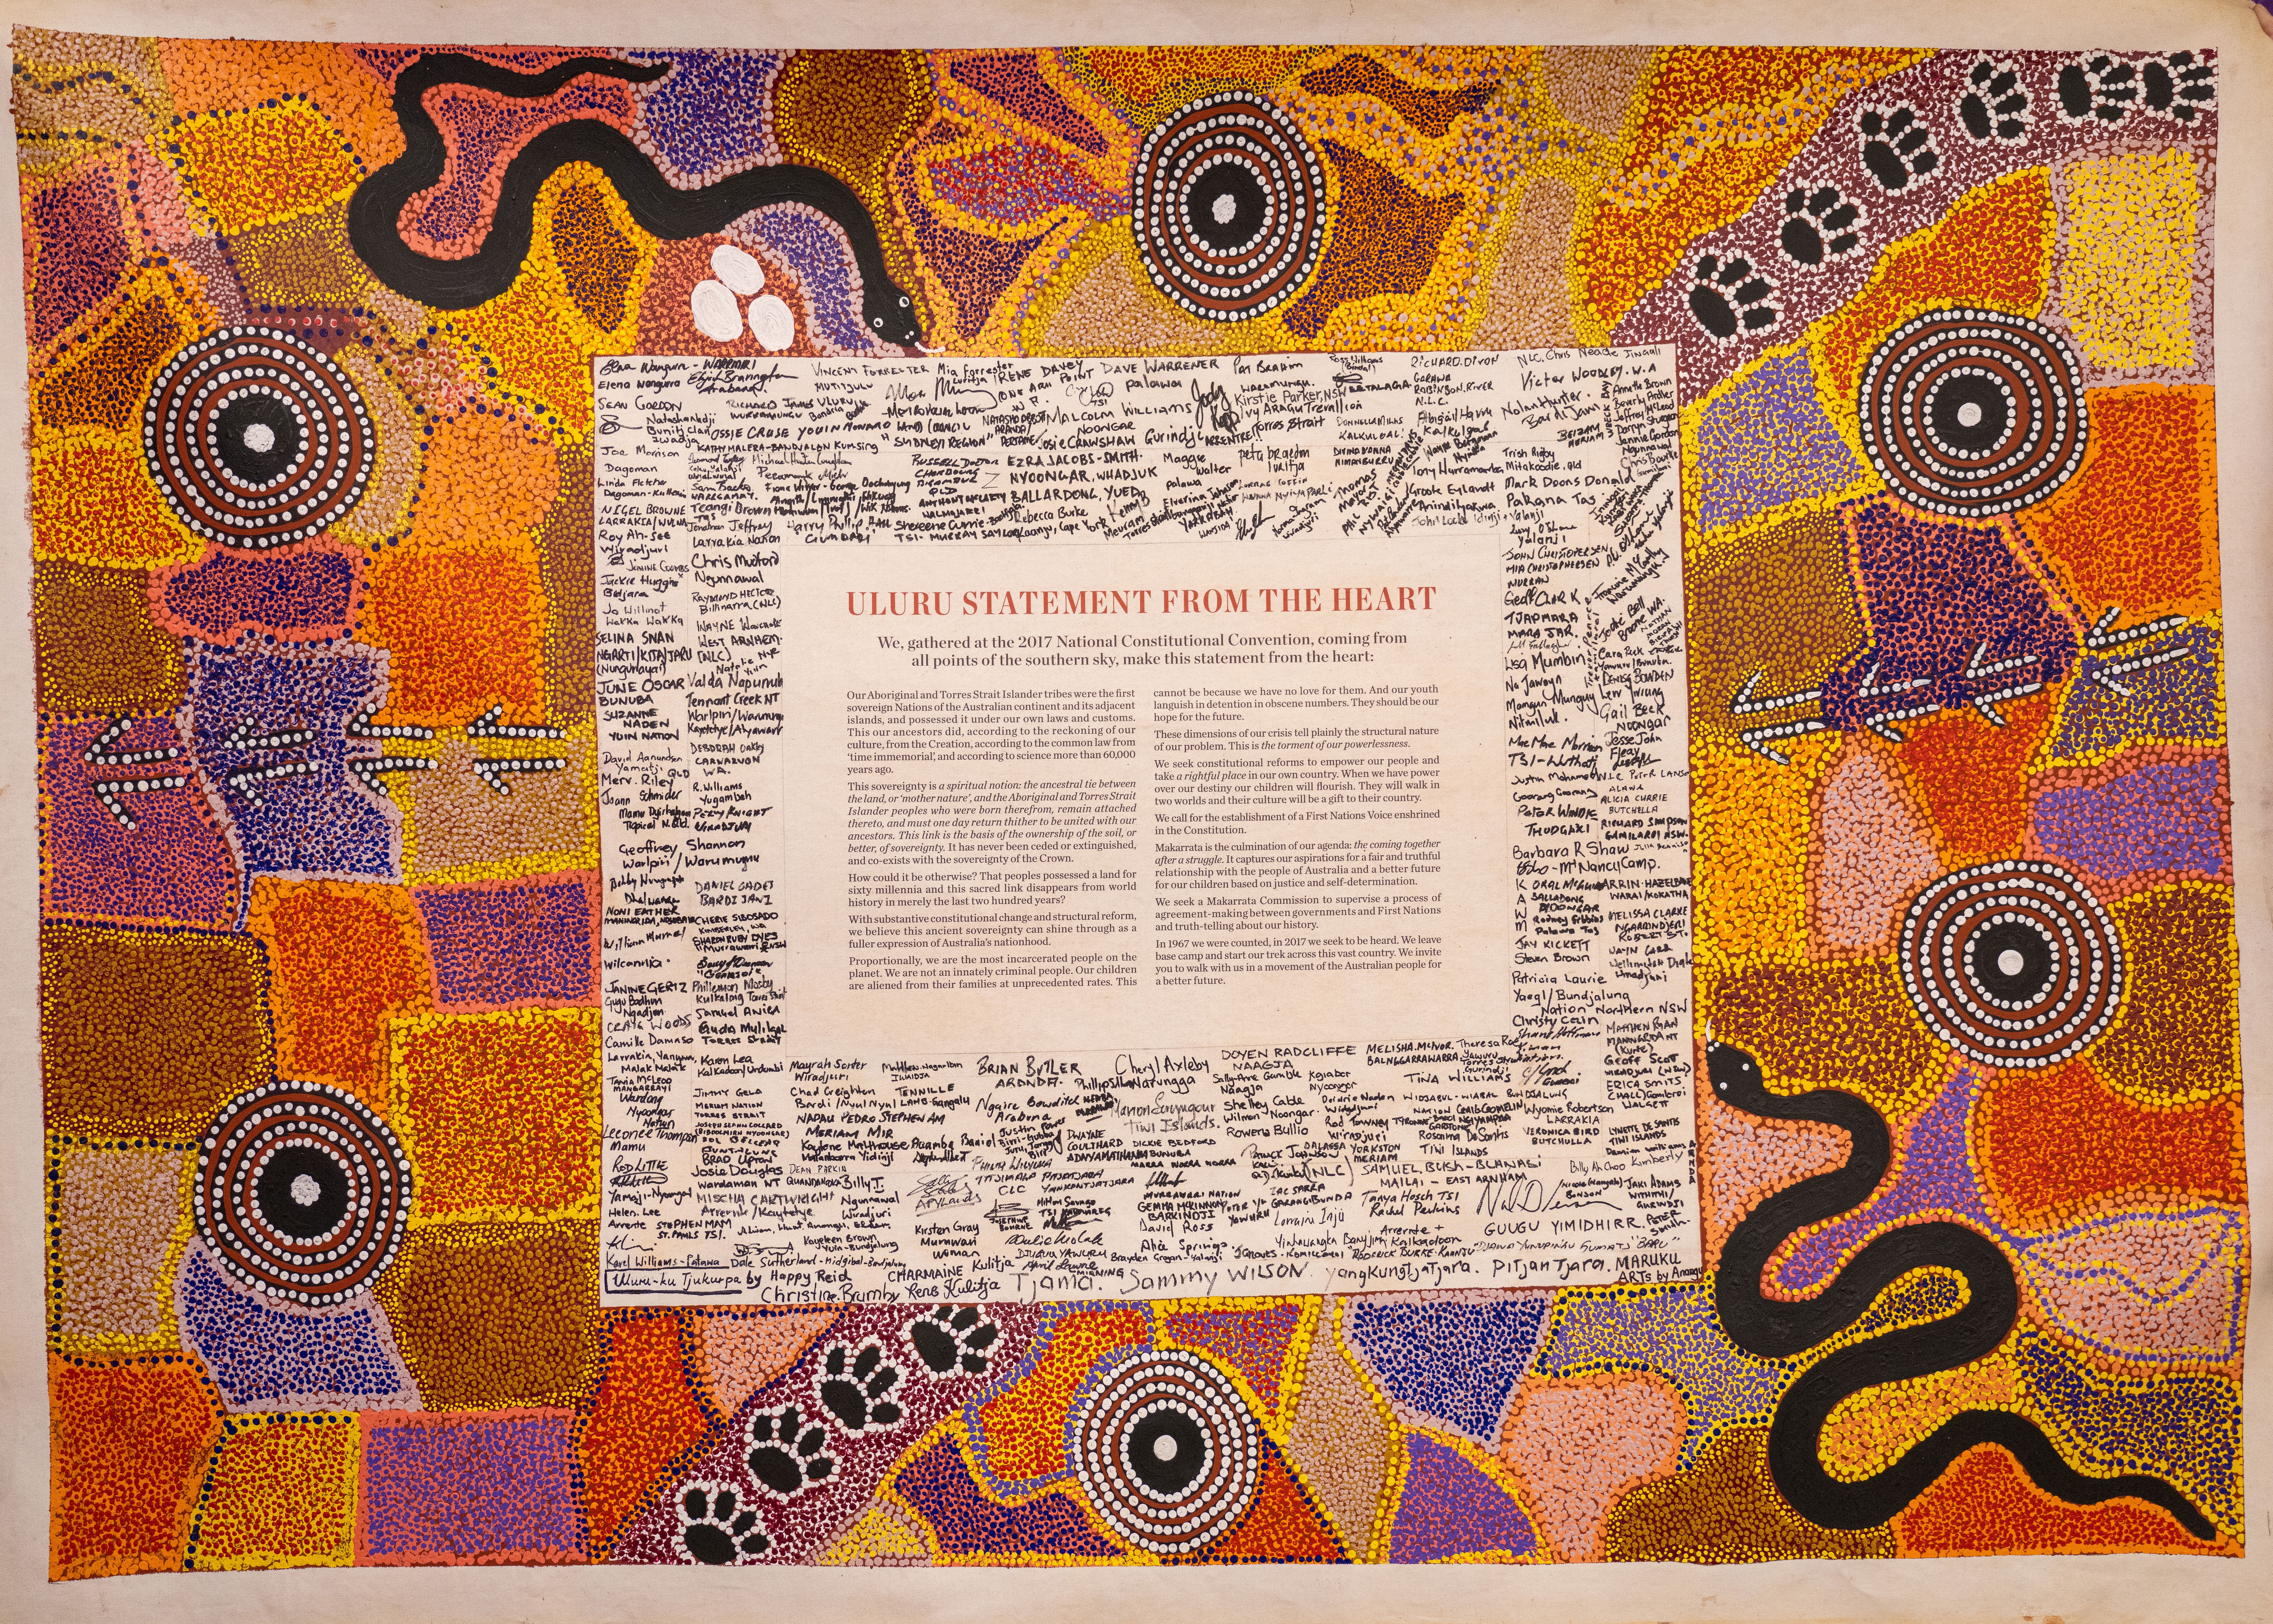 Picture of the Uluru Statement of the Heart